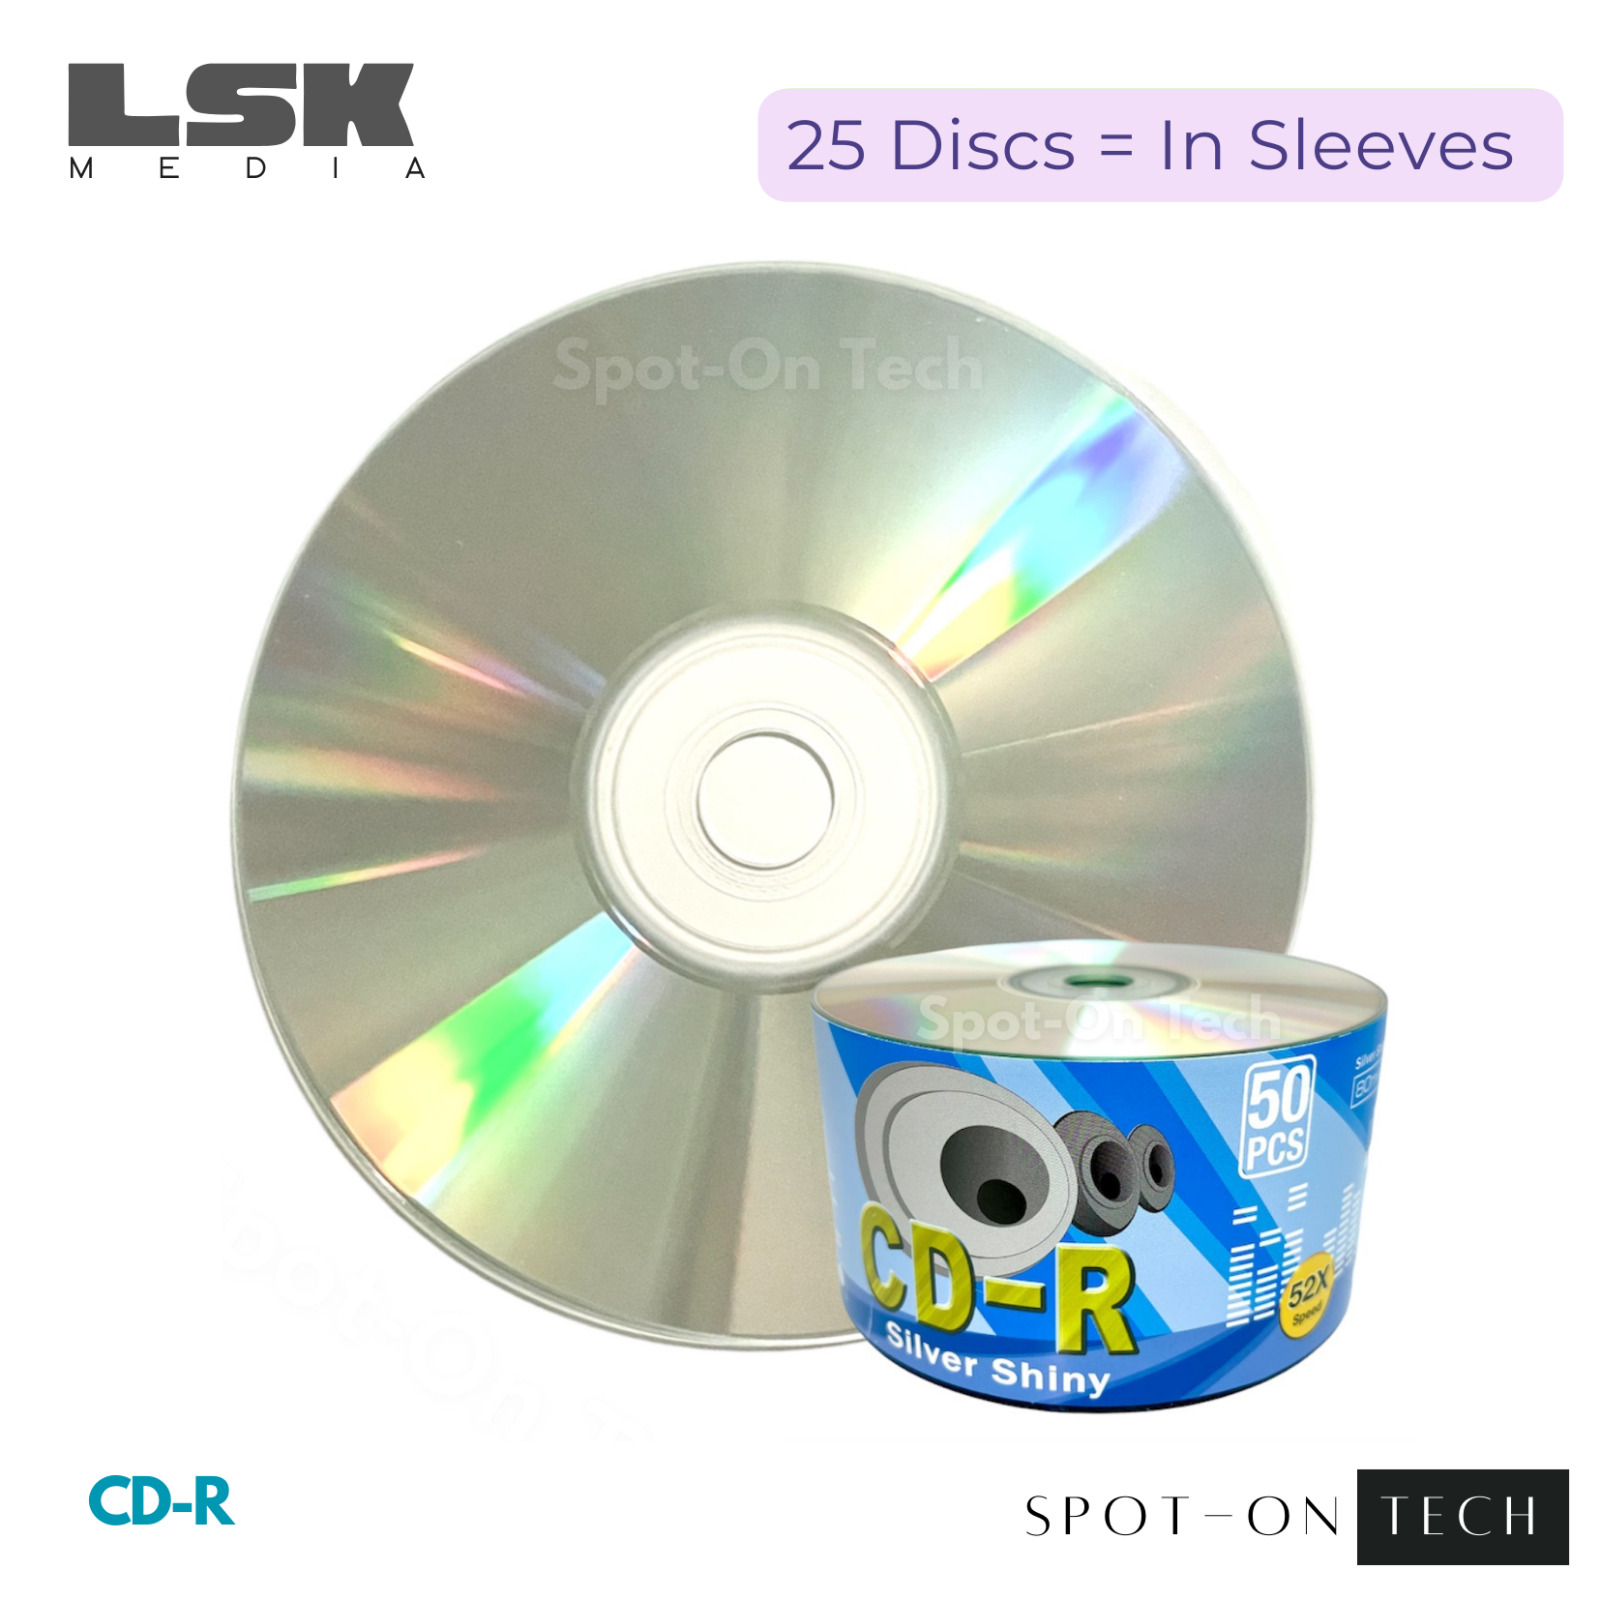 25 LSK CD CD-R Silver Shiny Top Duplication Grade - 80Min/700MB/52x in Sleeves